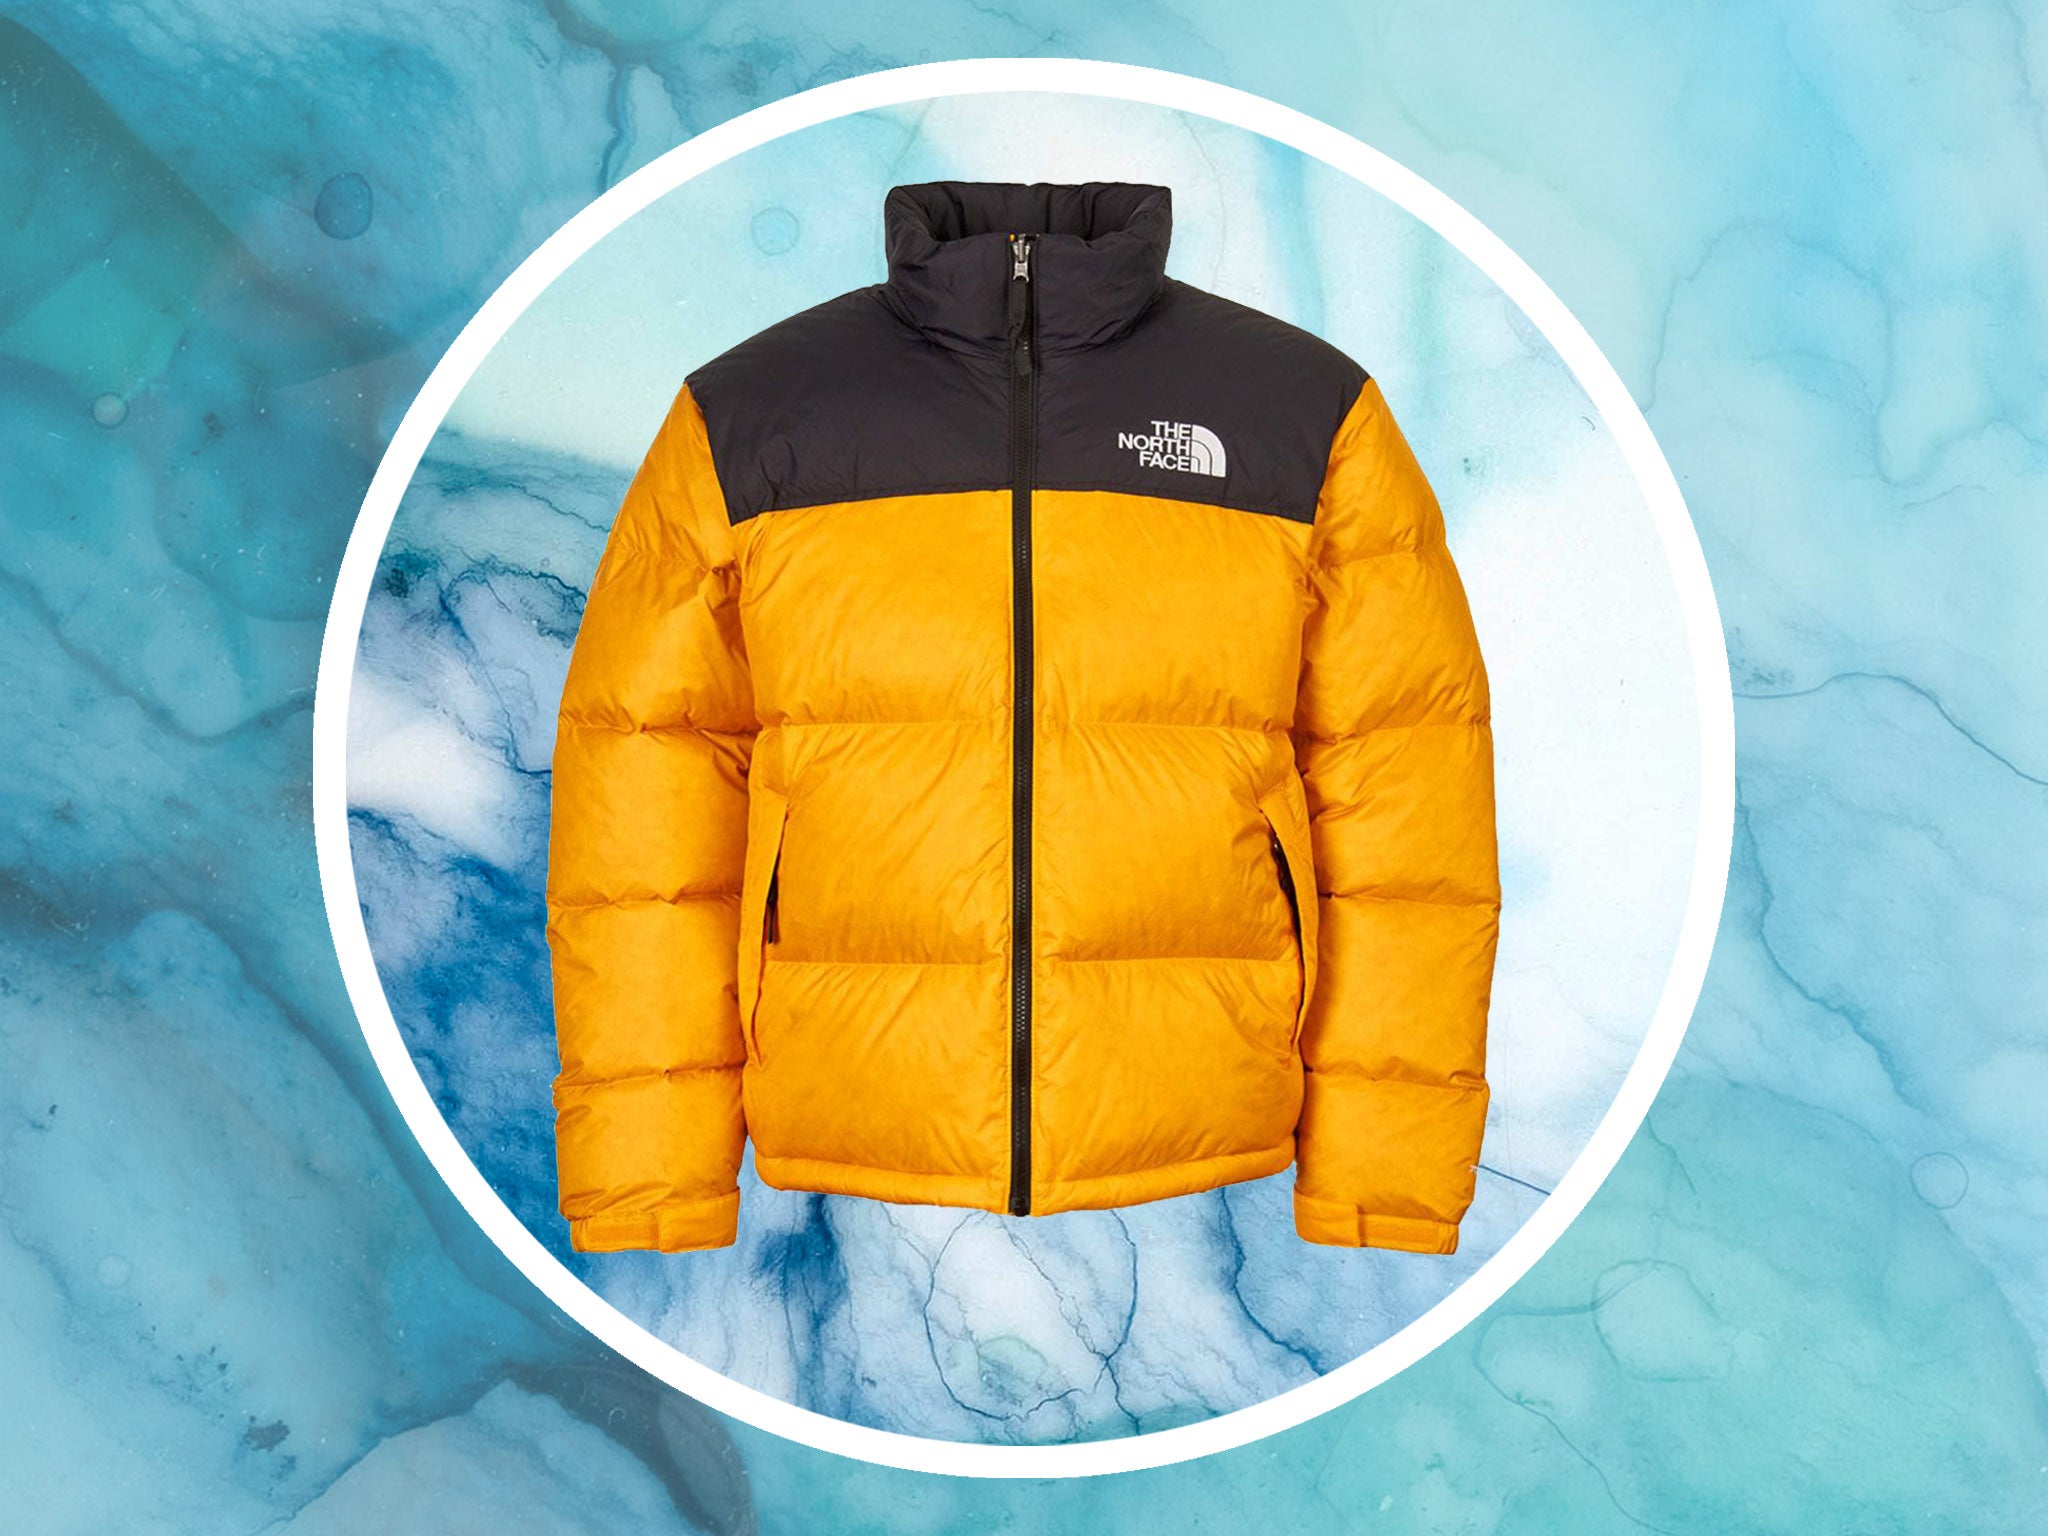 North Face nuptse puffer jacket review: Is it worth the hype